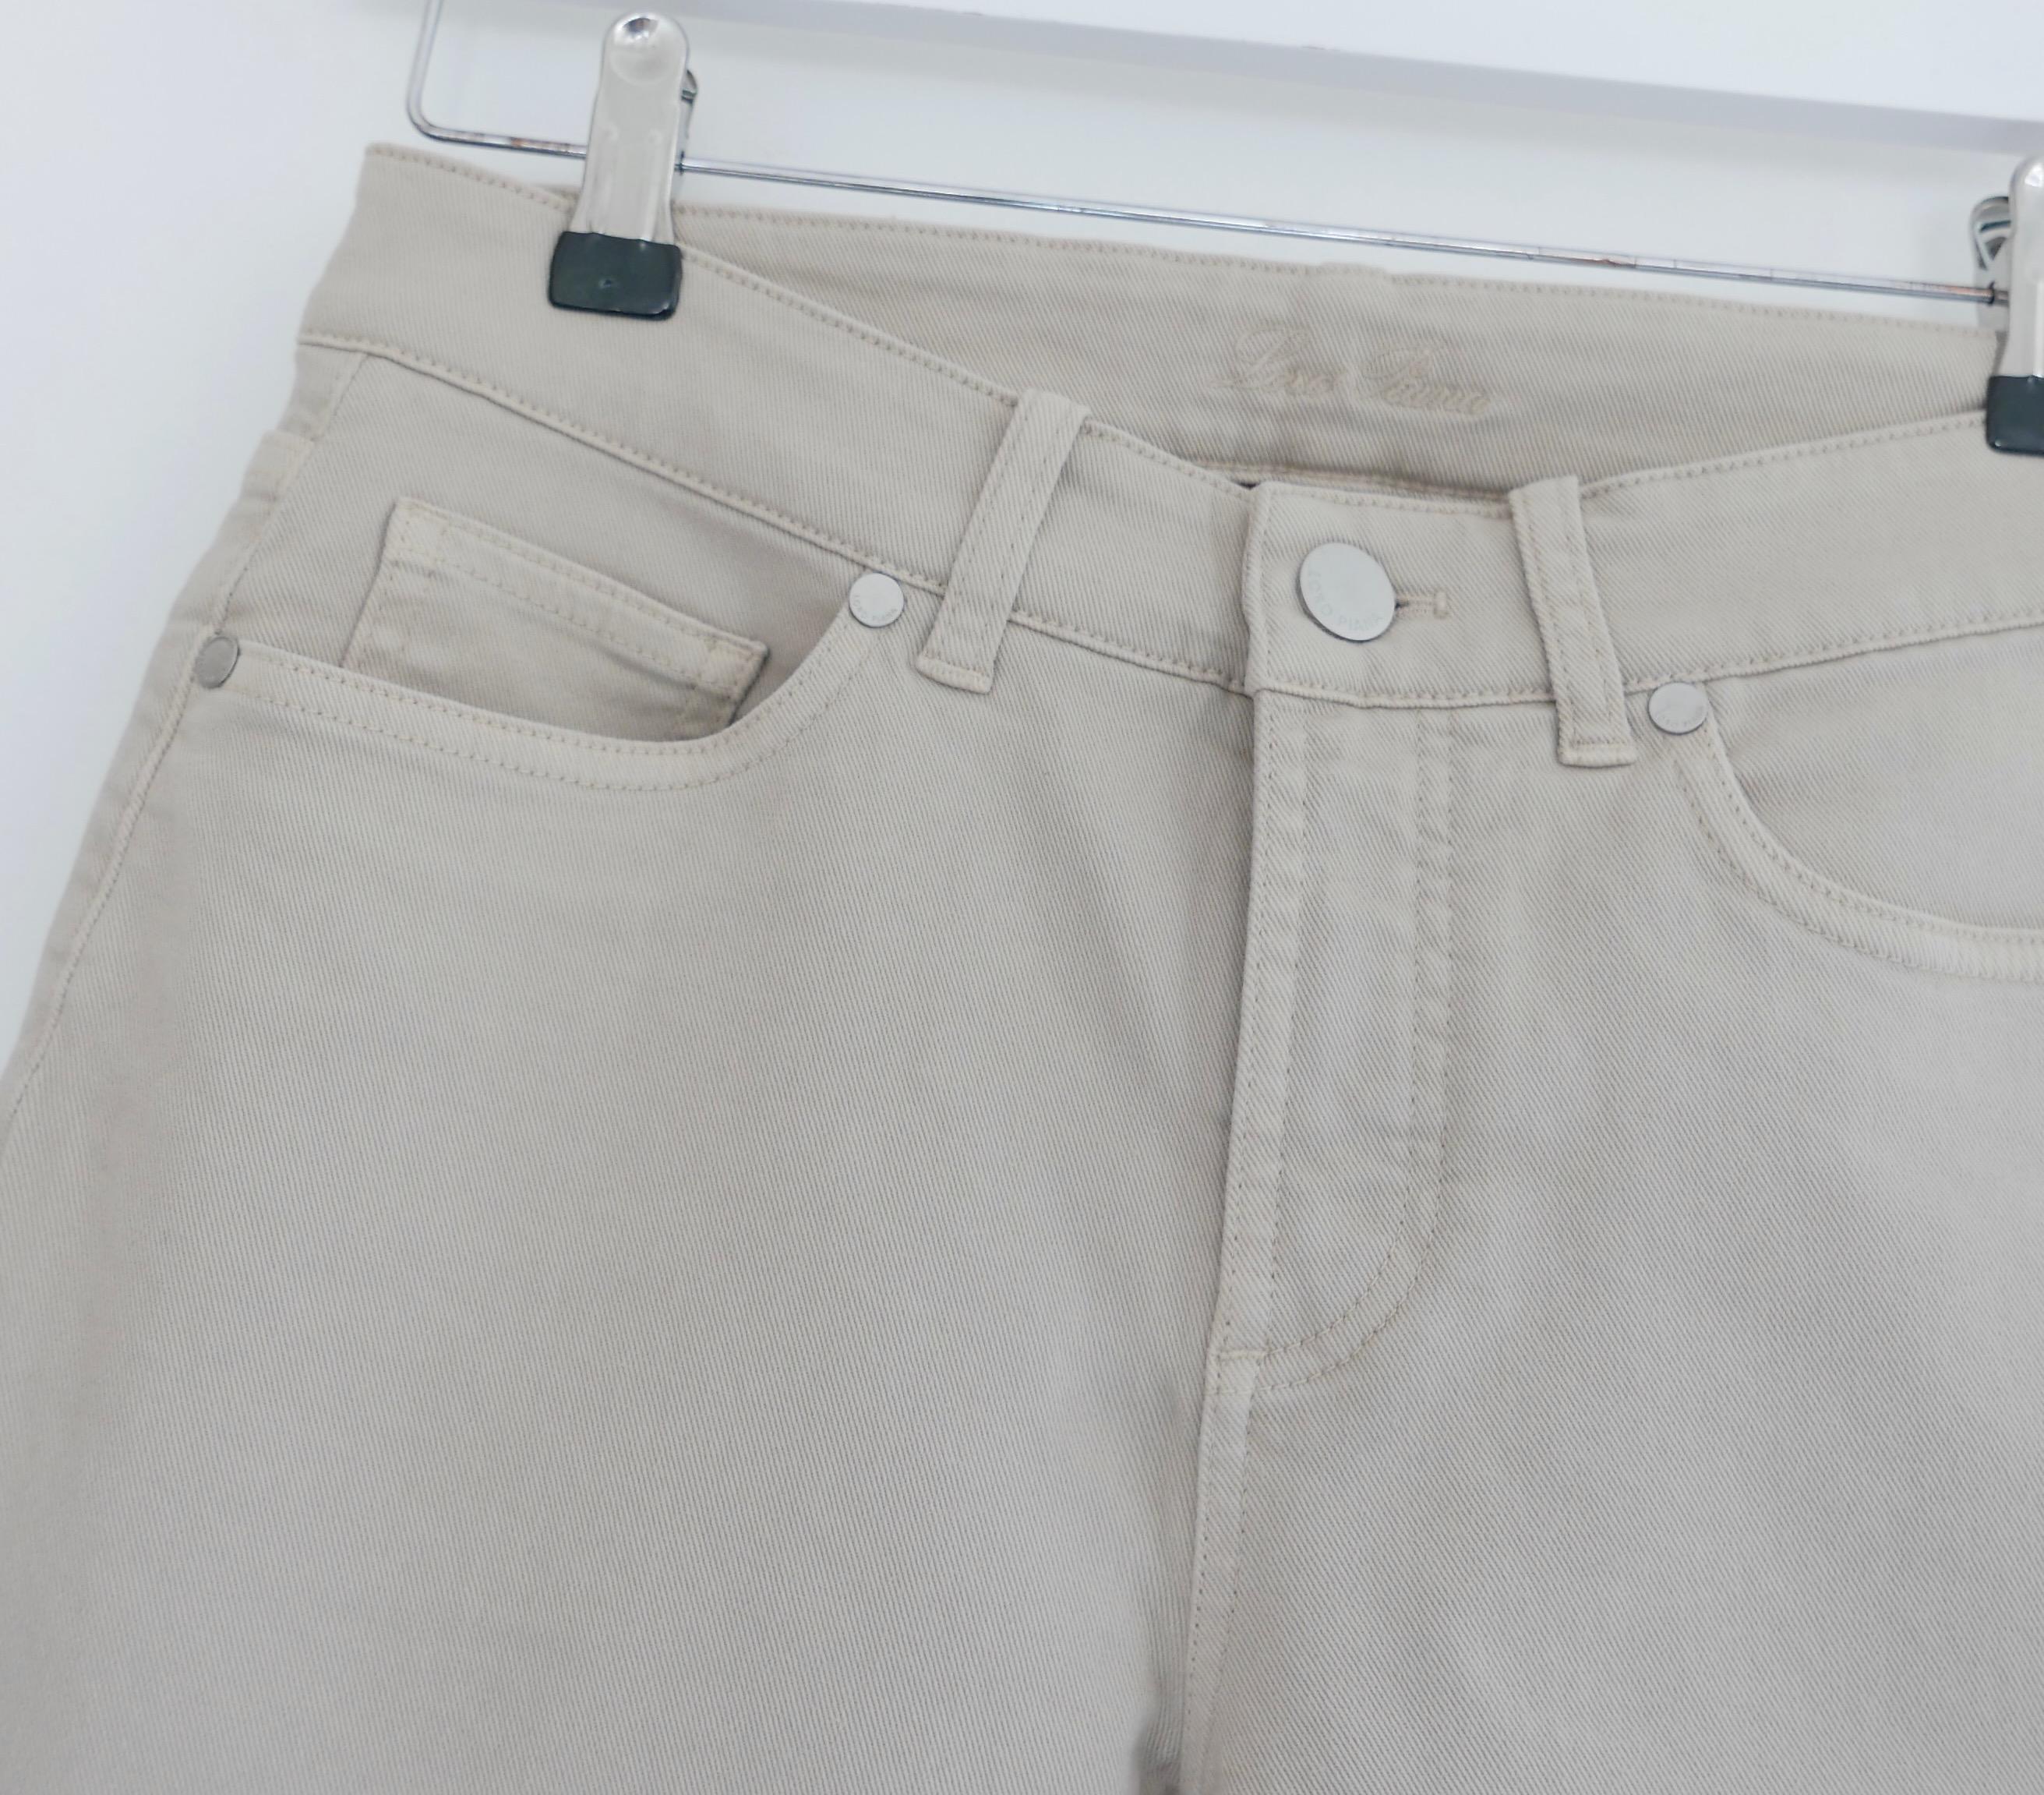 Classic luxe Loro Piana Mathias Light Denim trousers. Bought for £795 and new with tag. Made from mid weight beige cotton denim (with 2% polyamide), they have straight legs with tapered, ankle length hems, 5 pockets and etched matte silver tone